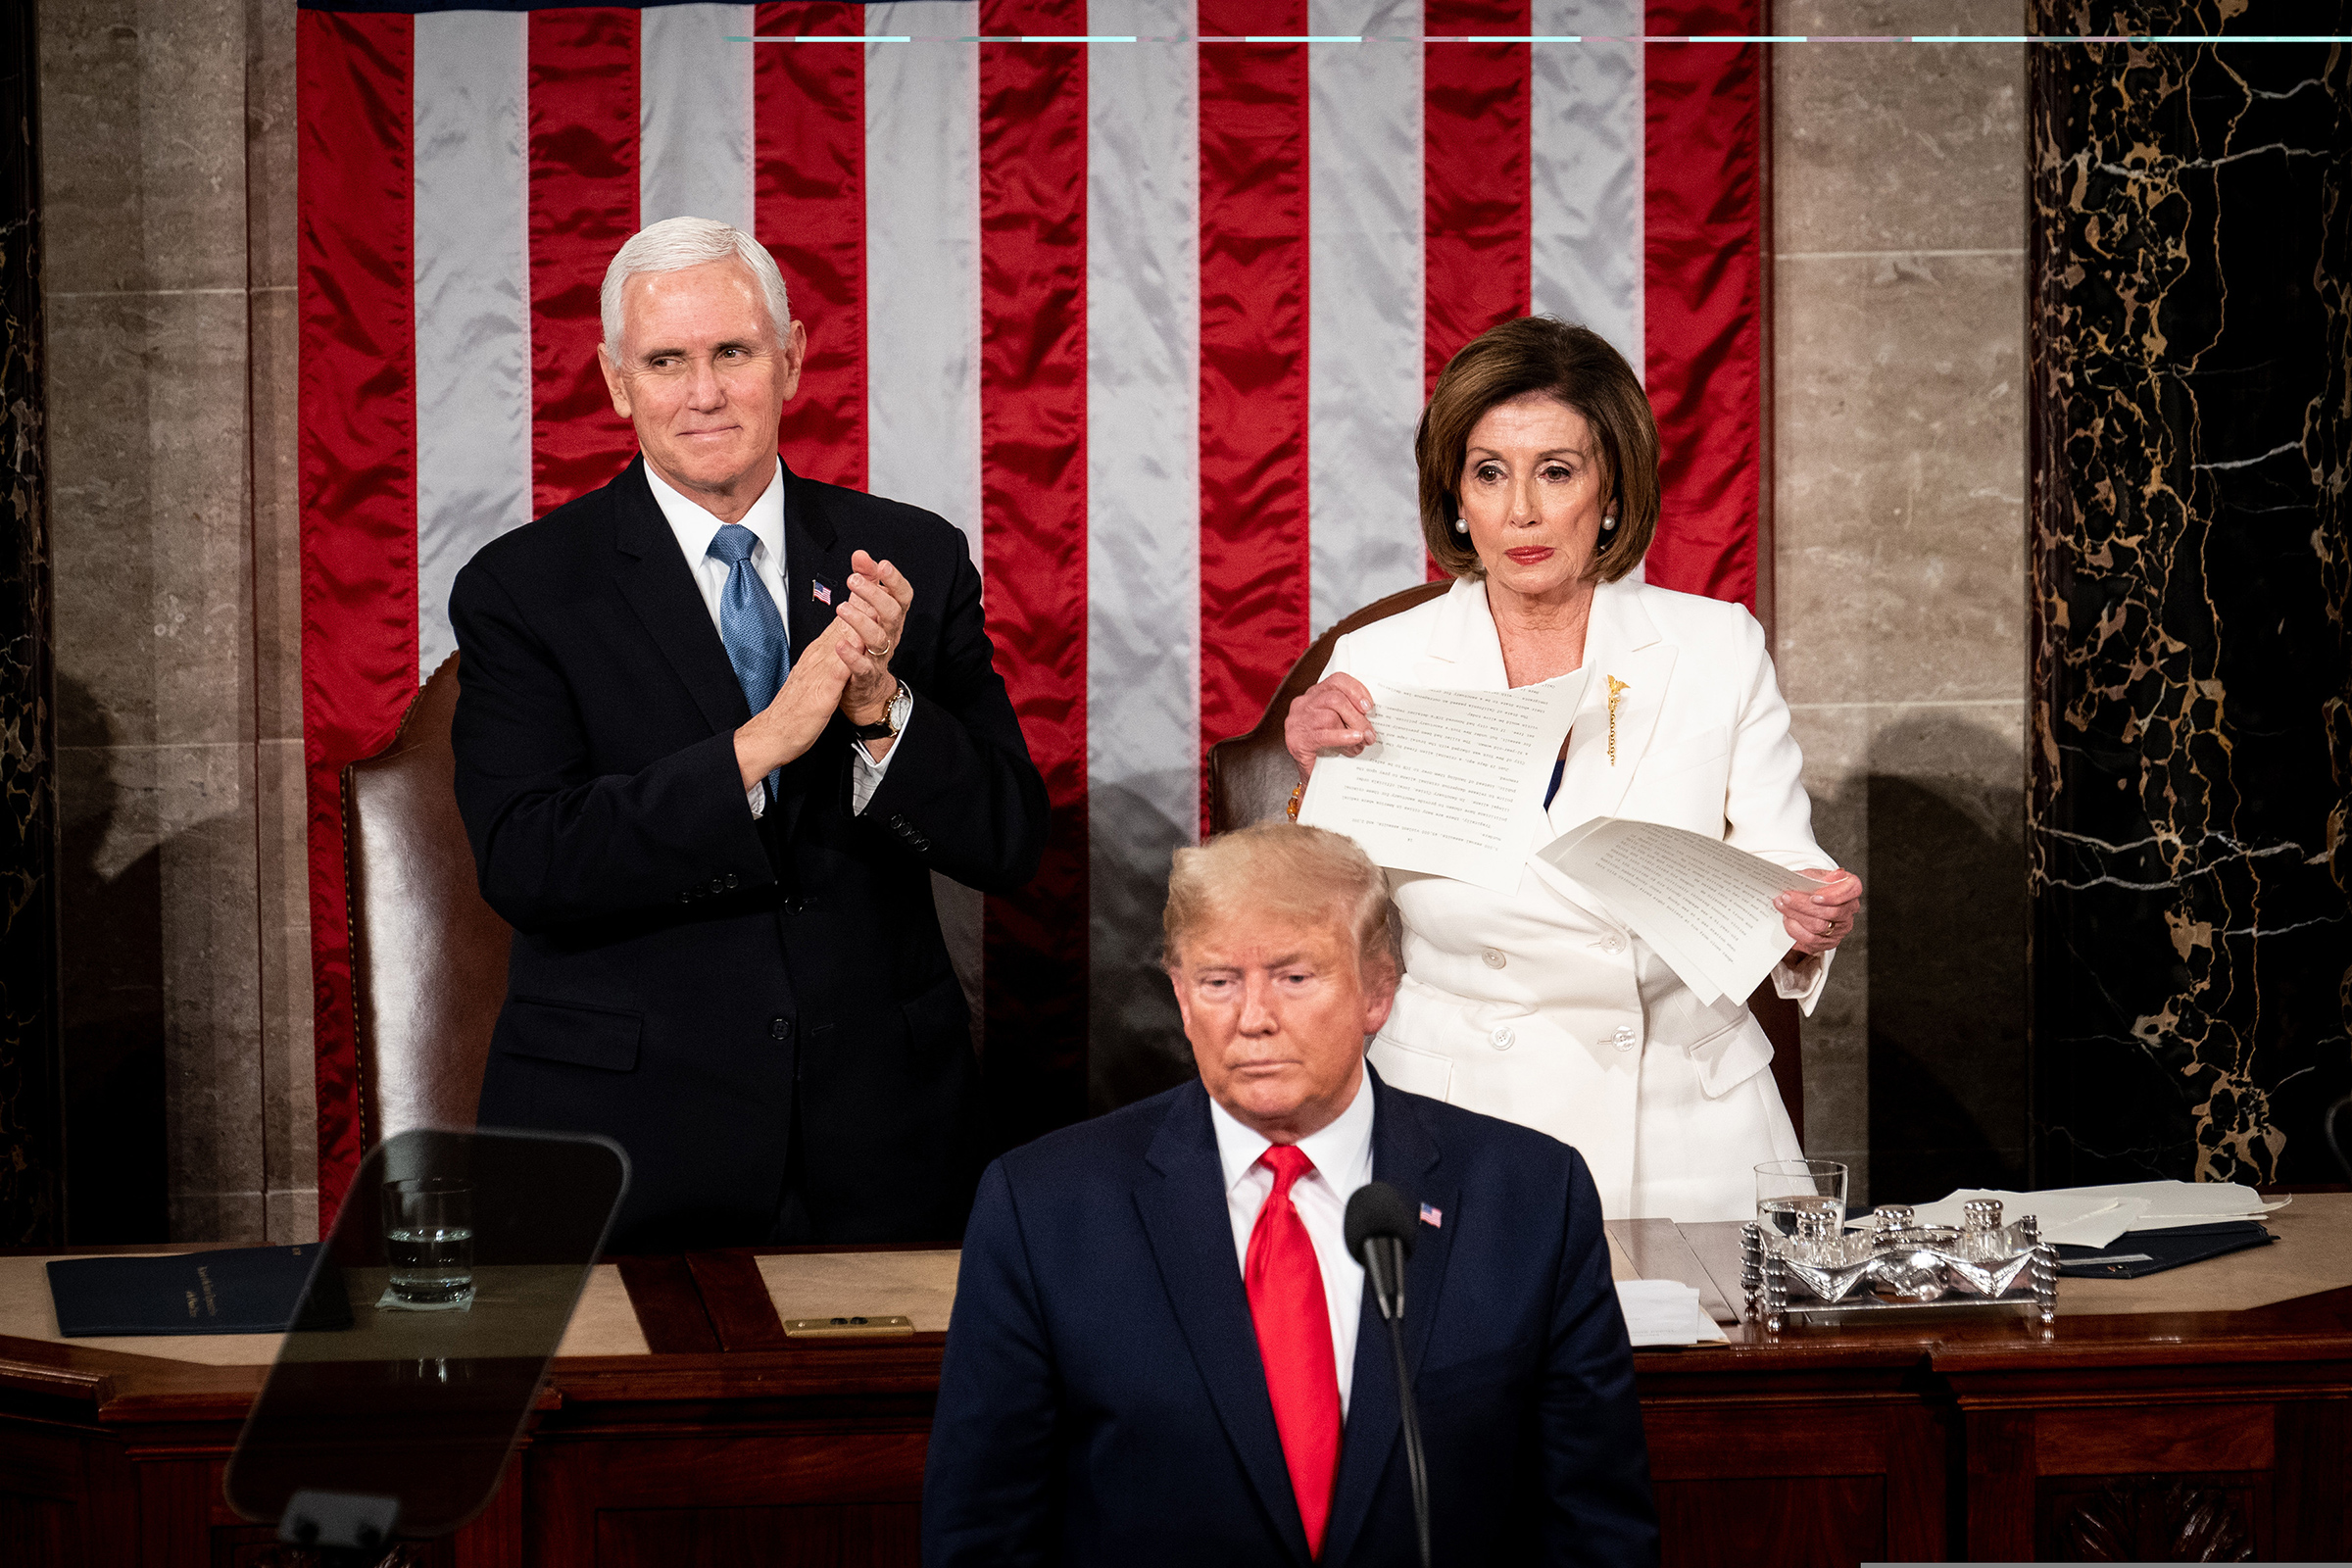 As Vice President Mike Pence applauds, House Speaker Nancy Pelosi rips up her copy of President Trump's State of the Union address following his speech at the Capitol in Washington, D.C., on Feb. 4. (Erin Schaff—The New York Times/Redux)